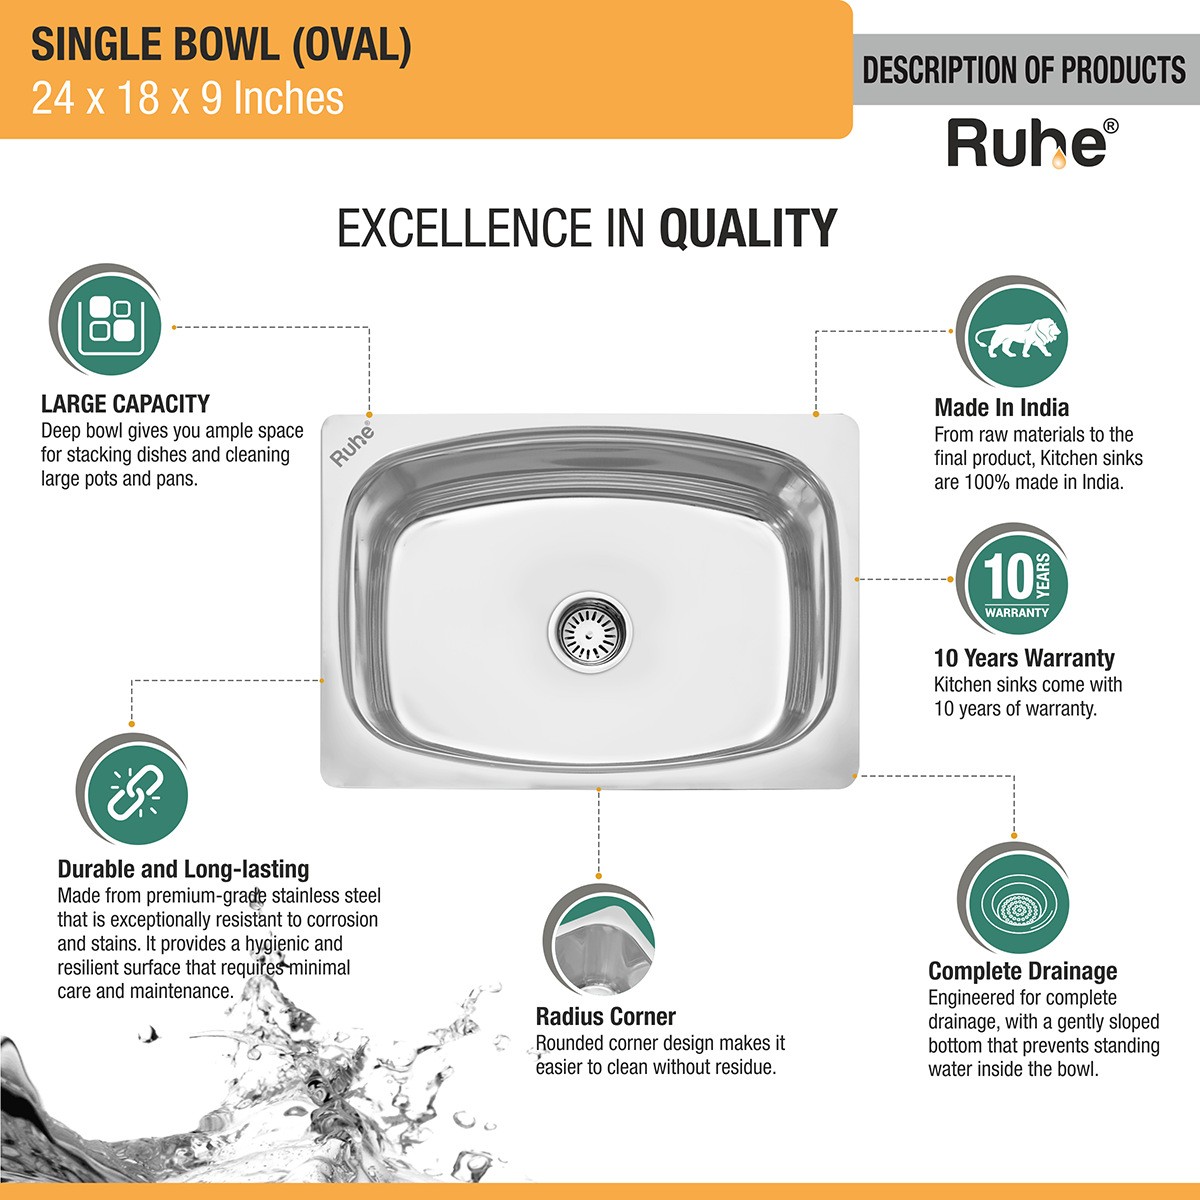 Oval Single Bowl (24 x 18 x 9 inches) 304-Grade Kitchen Sink description of products